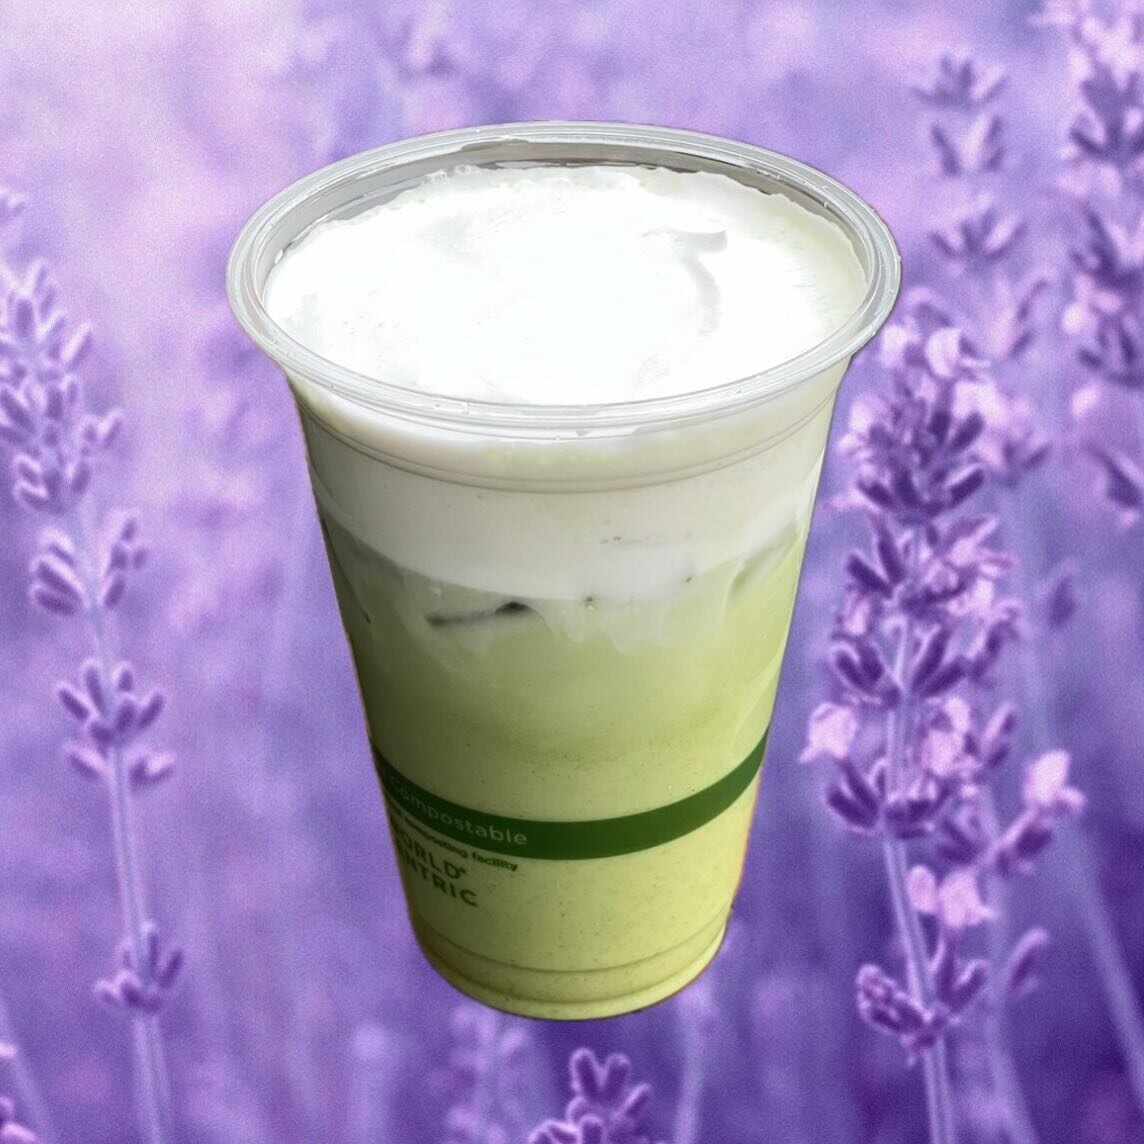 Spring is here! Lavender is back! Our newest spring seasonal is Lavender Haze: @3treetea iced matcha topped with lavender infused cold foam🪻🍵 Happy Spring weekend!

#lavendermatcha #lavendercoldfoam #icedmatcha #seasonaldrink #springtime #highlandp